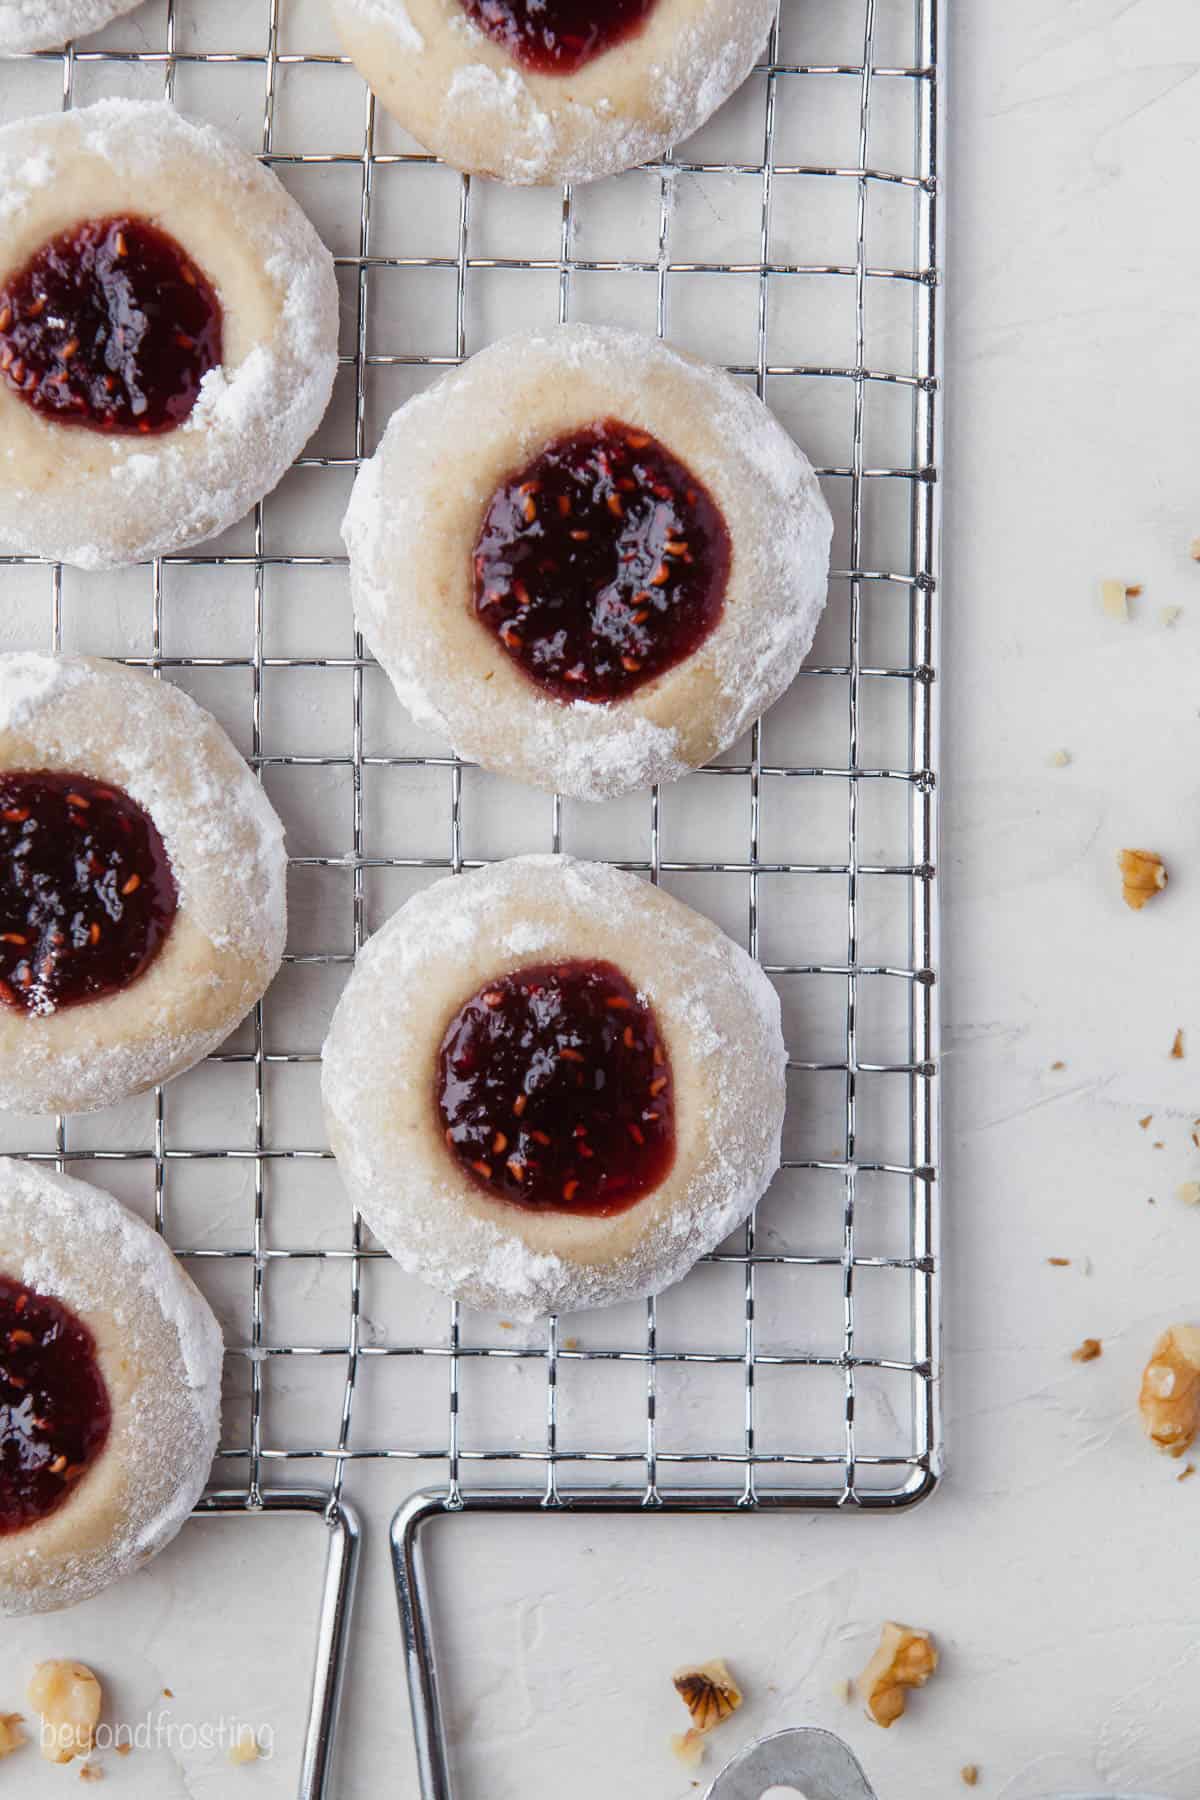 A bird's-eye view of jam-filled thumbprint cookies on a wire rack with a handle